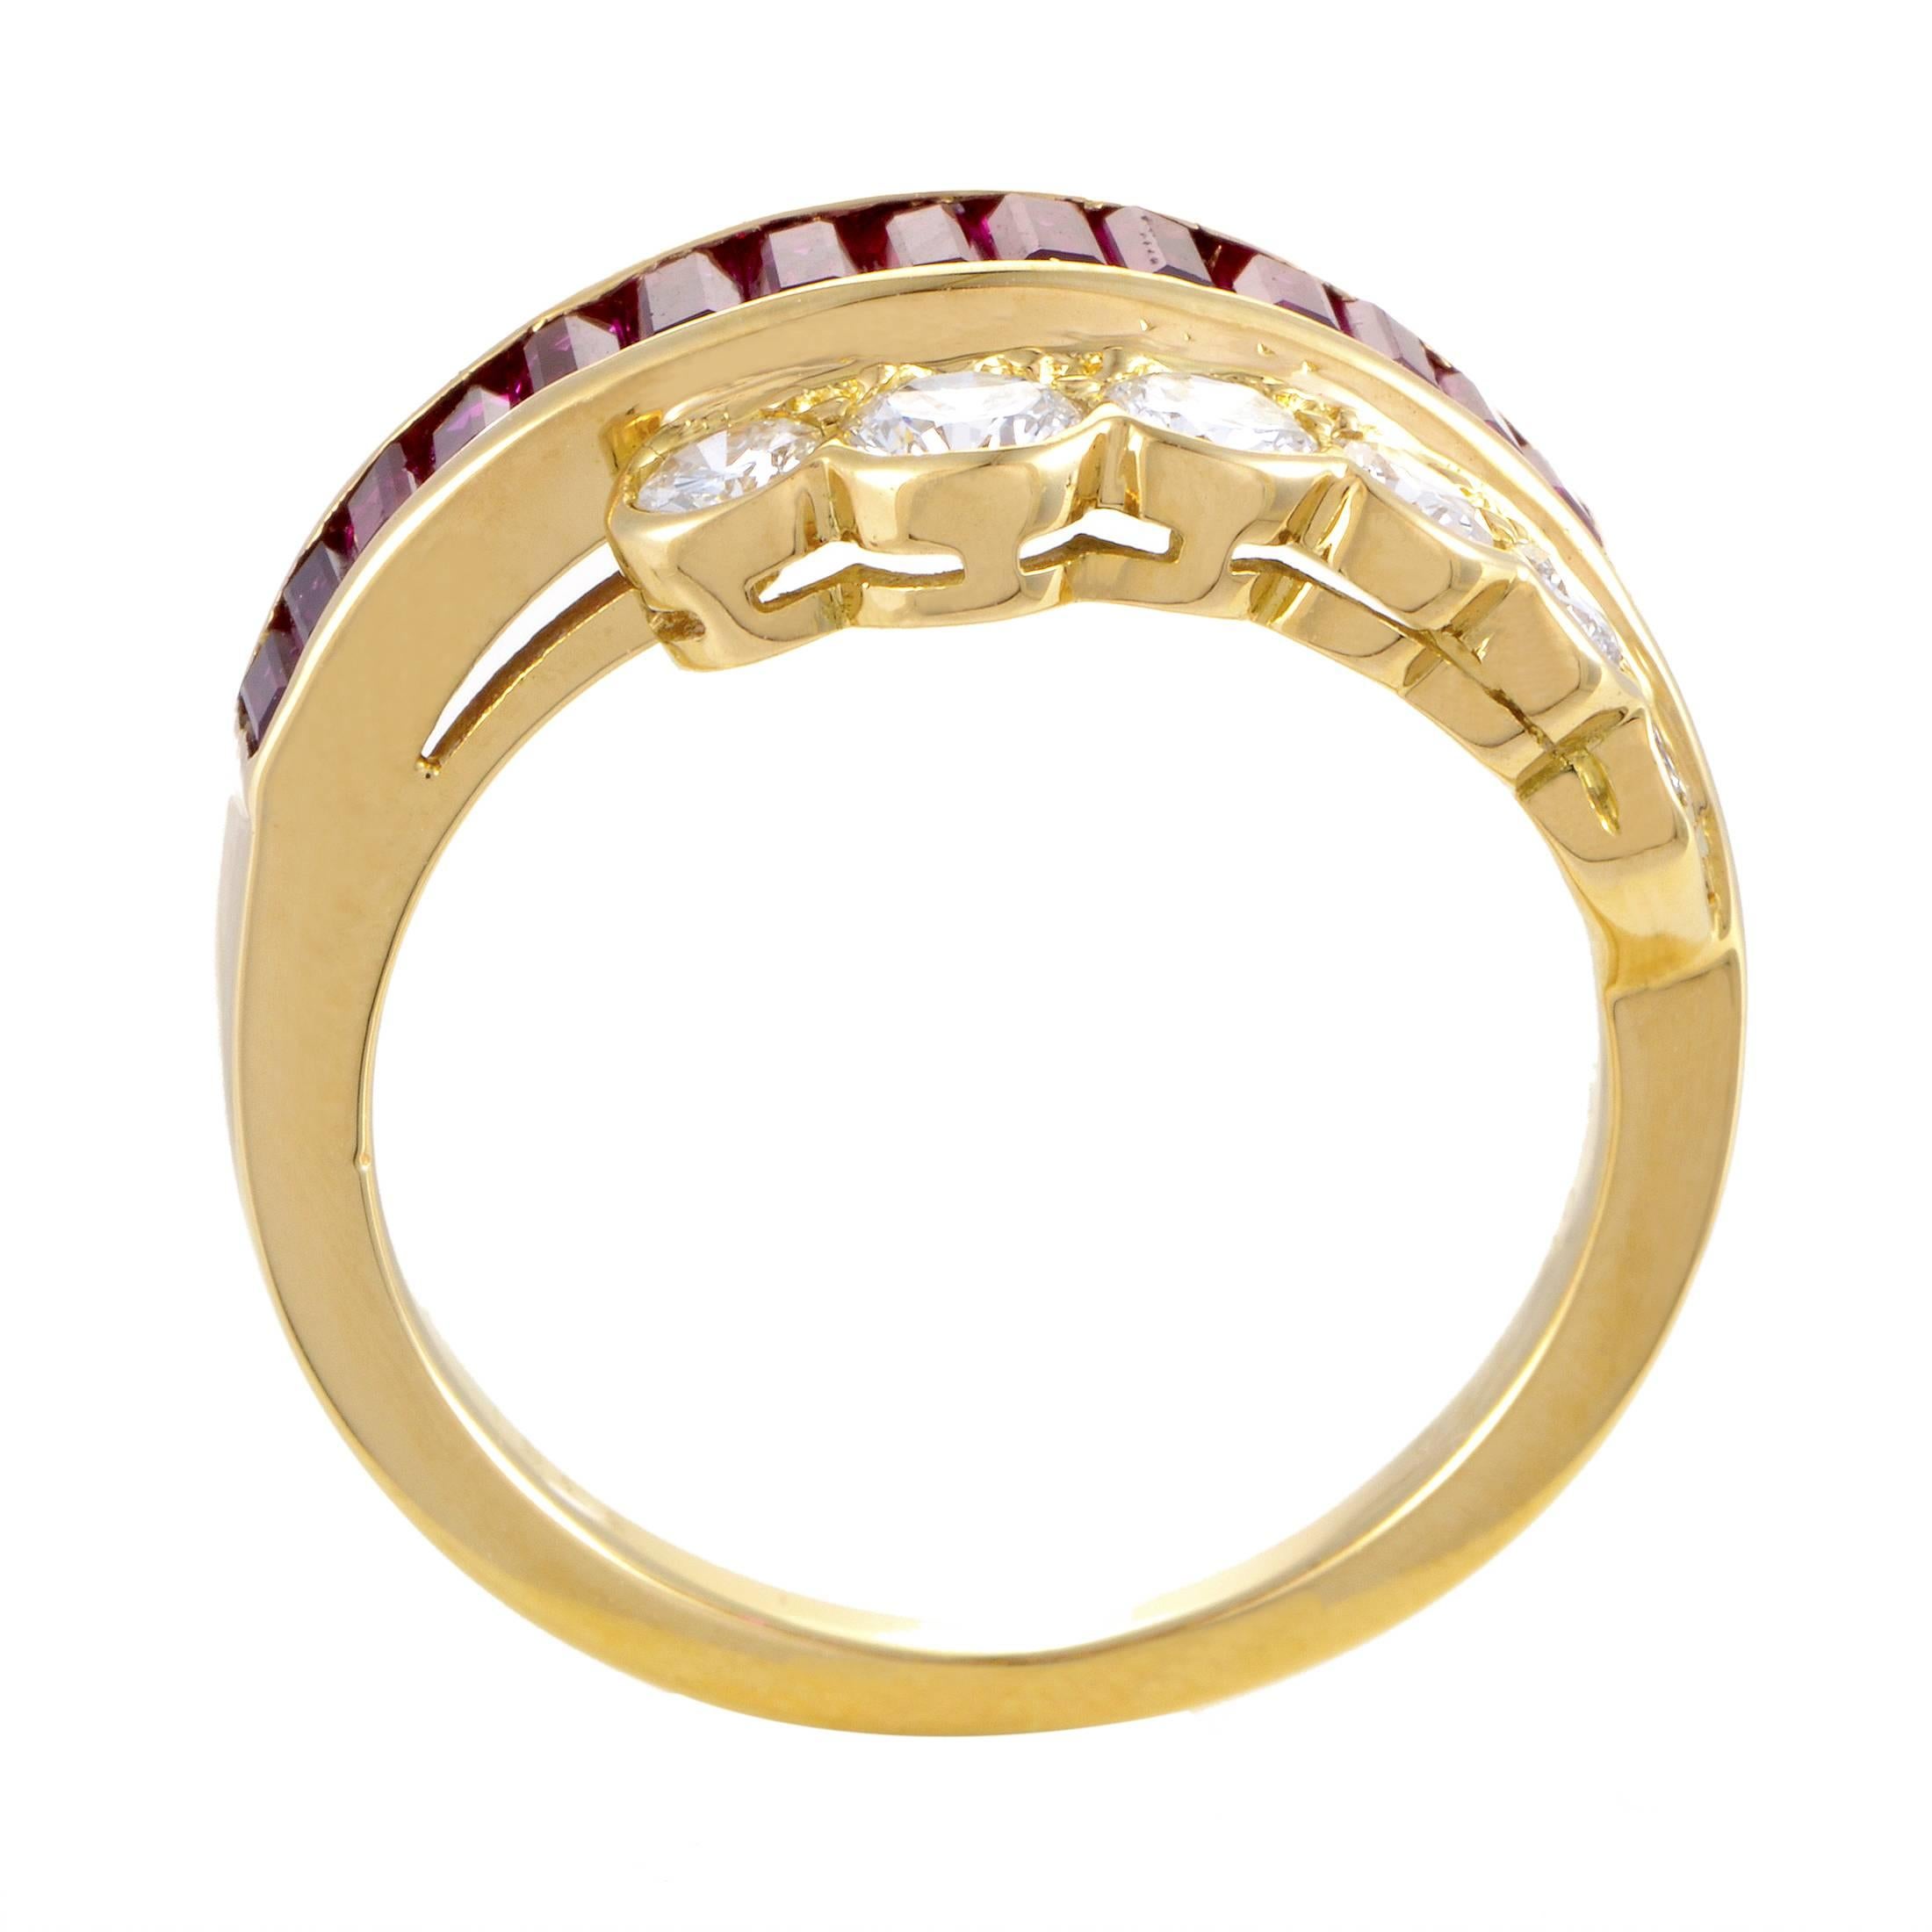 A neat arrangement of exquisitely cut rubies weighing in total 1.20 carats combines fabulously with 18K yellow gold to produce a charming allure in this gorgeous ring from Van Cleef & Arpels while F-color diamonds of VVS clarity totaling 0.80ct lend